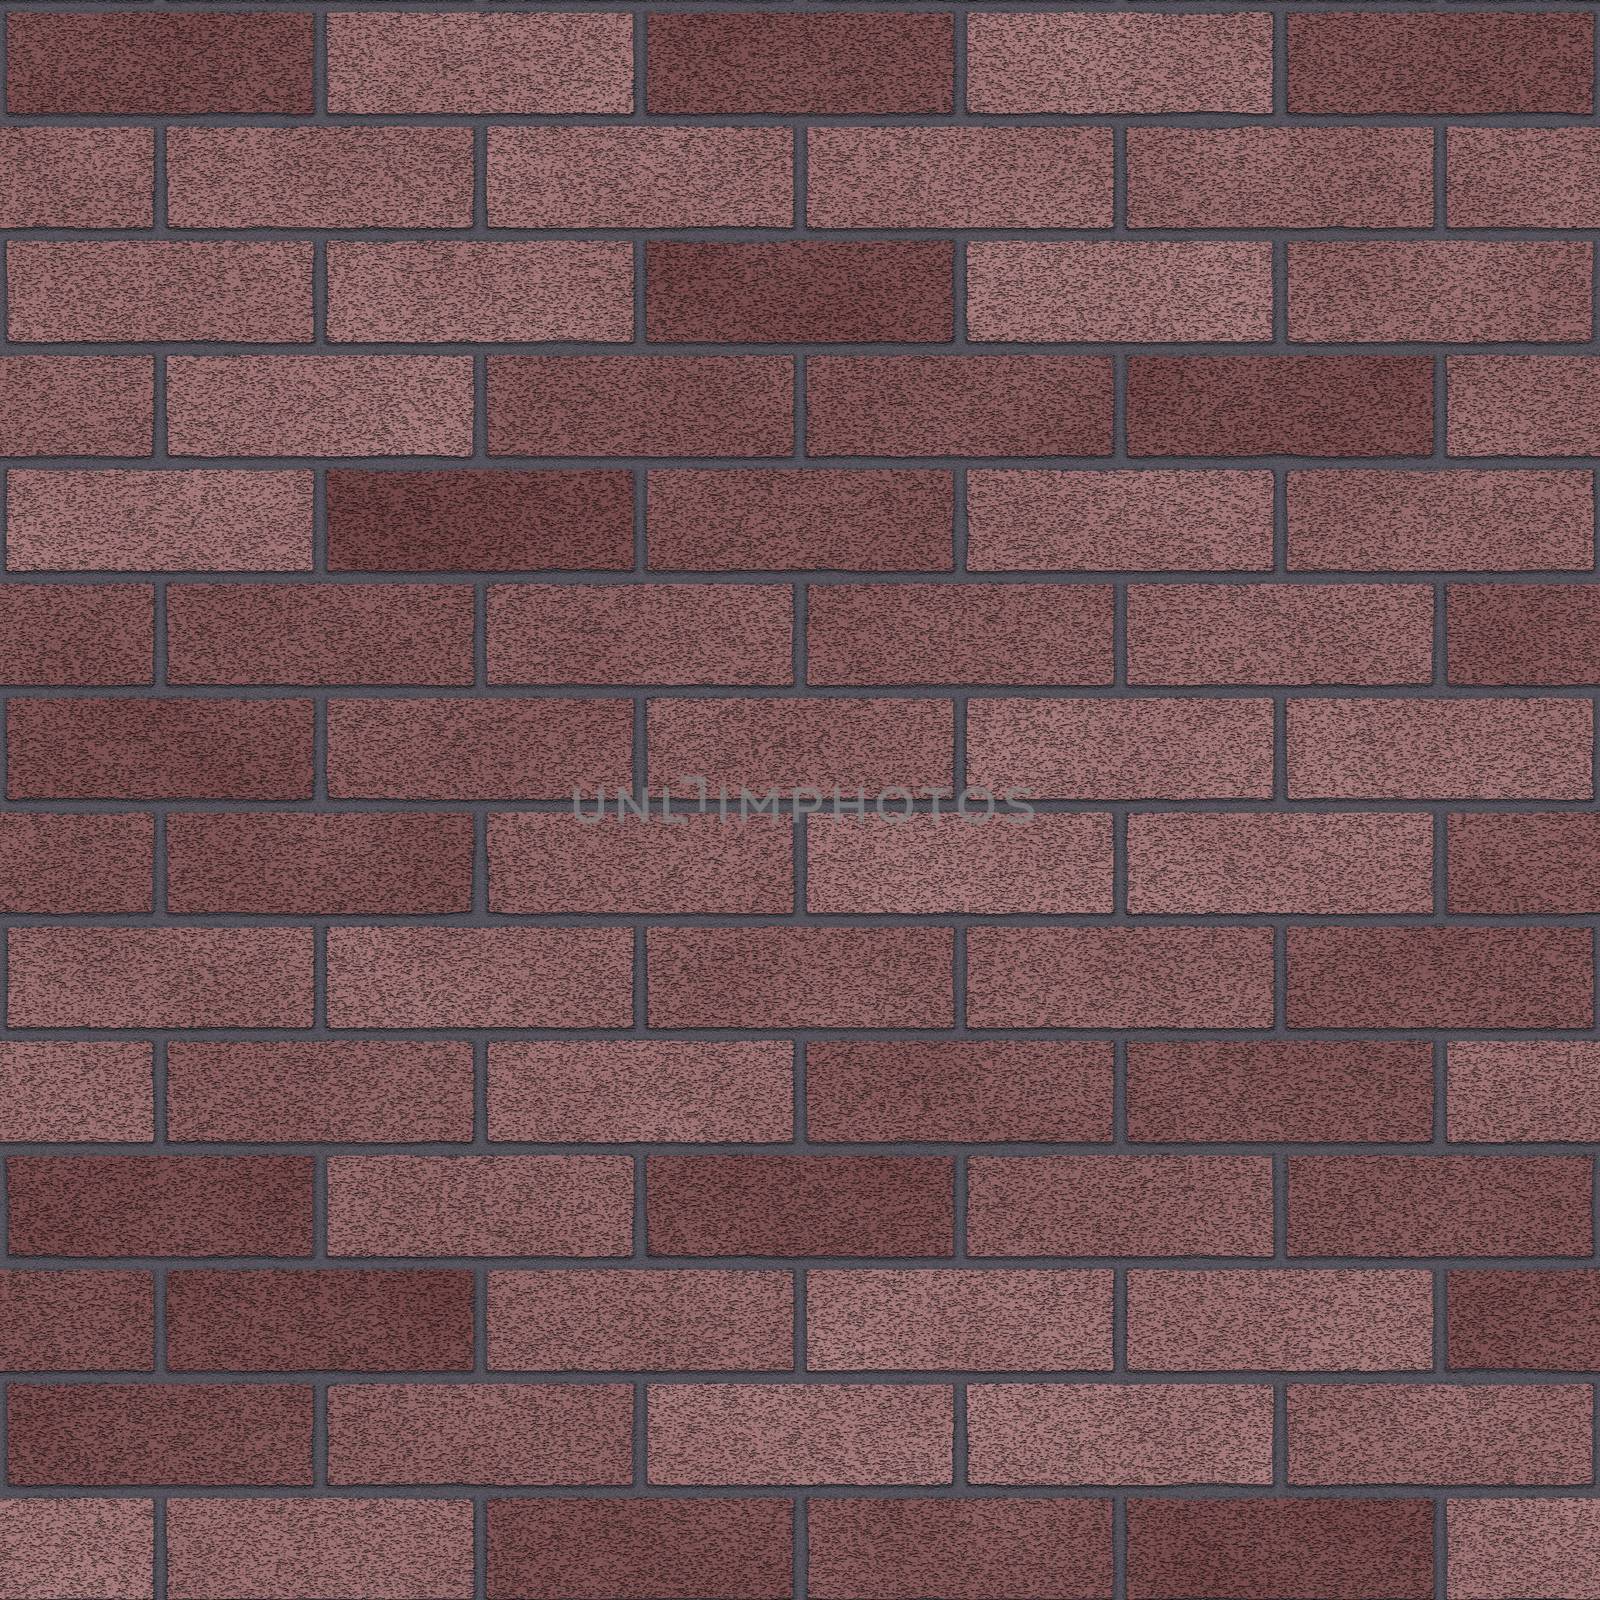 Plum colored clay brick wall seamless texture, computer generated background.